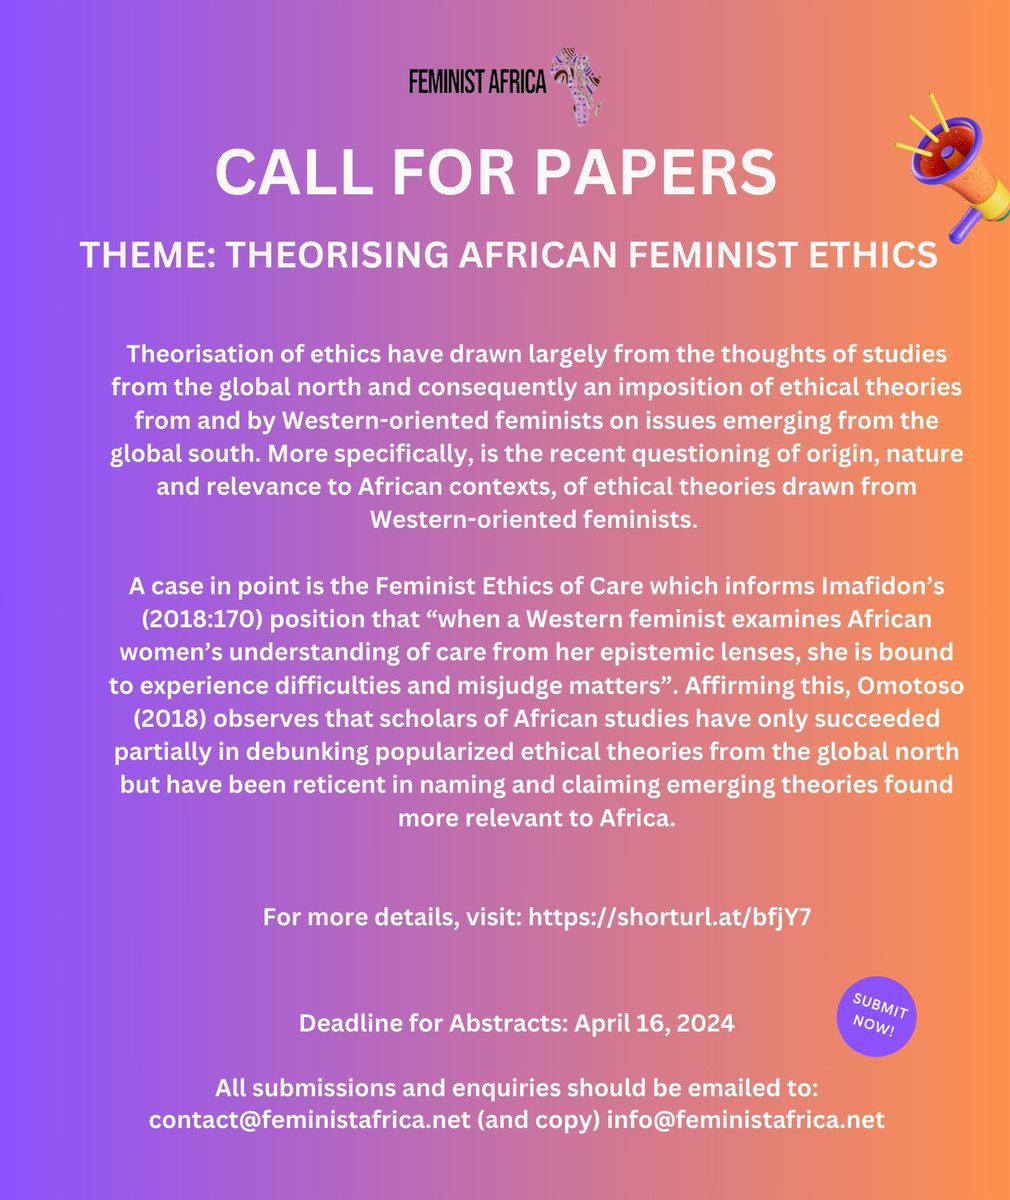 The FA Journal is Calling for Papers. Topic: Theorising African Feminist Ethics Deadline for Submission of Abstracts: April 16, 2024 Find out more details here: feministafrica.net/2024/02/15/the…